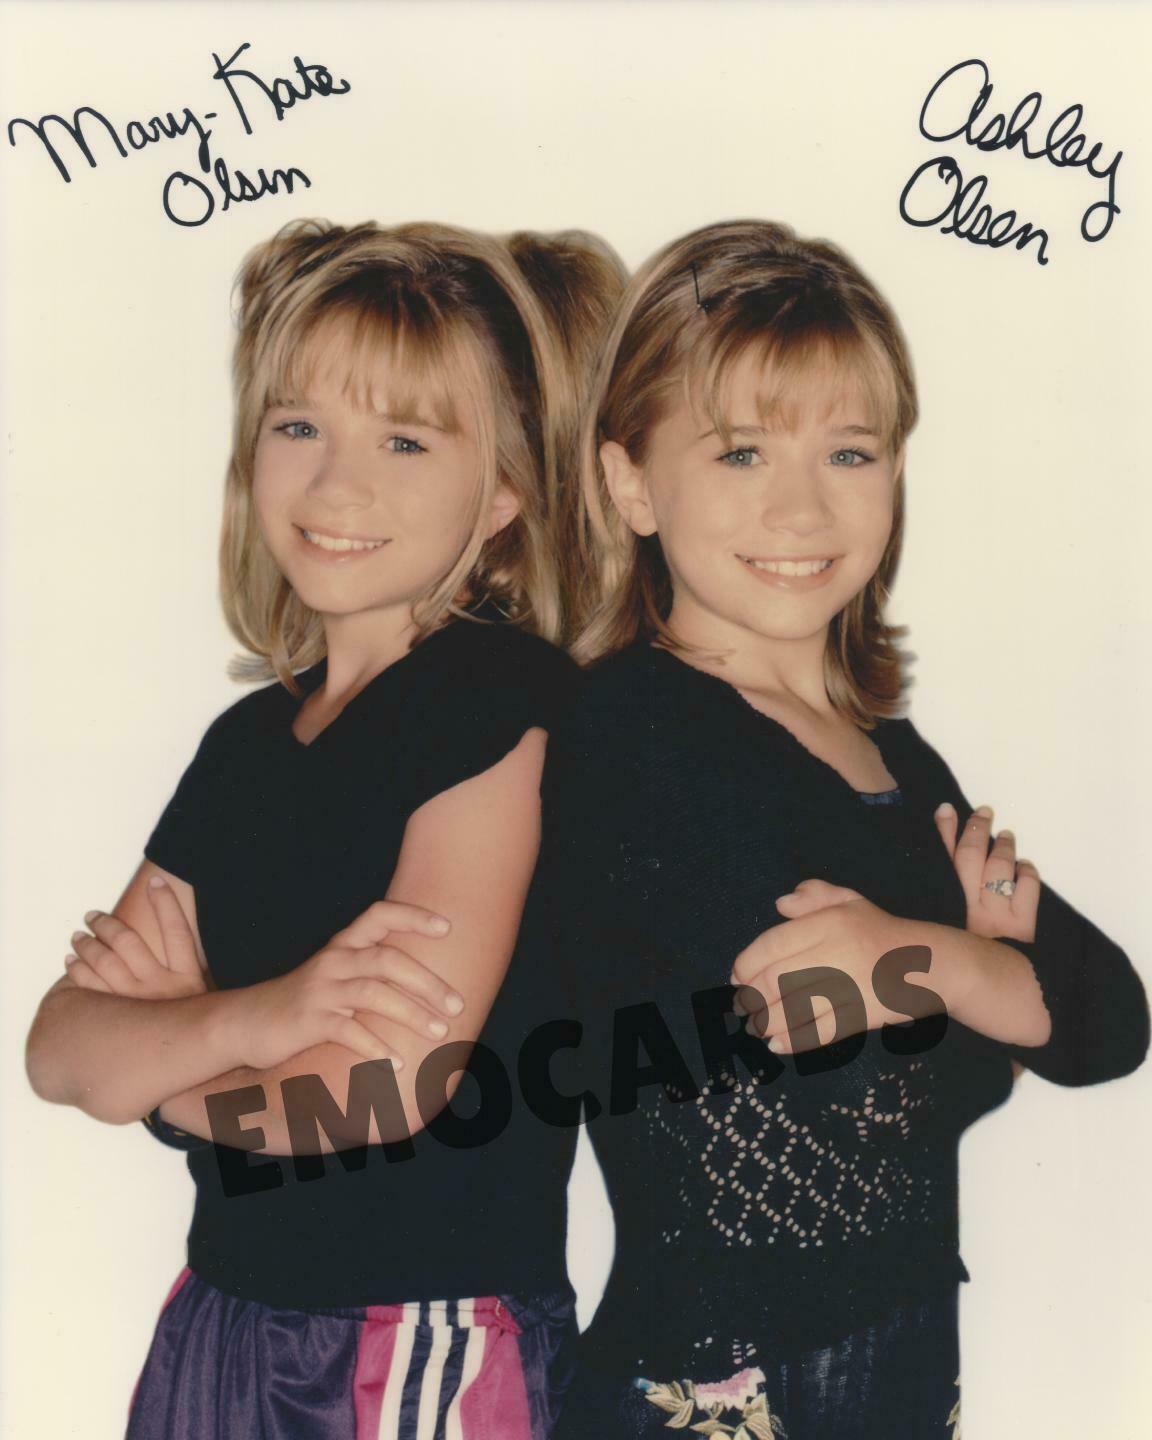 FULL HOUSE MARY KATE ASHLEY OLSEN TWINS SIGNED 8x10 PHOTO RP AUTO PRINT POSTER